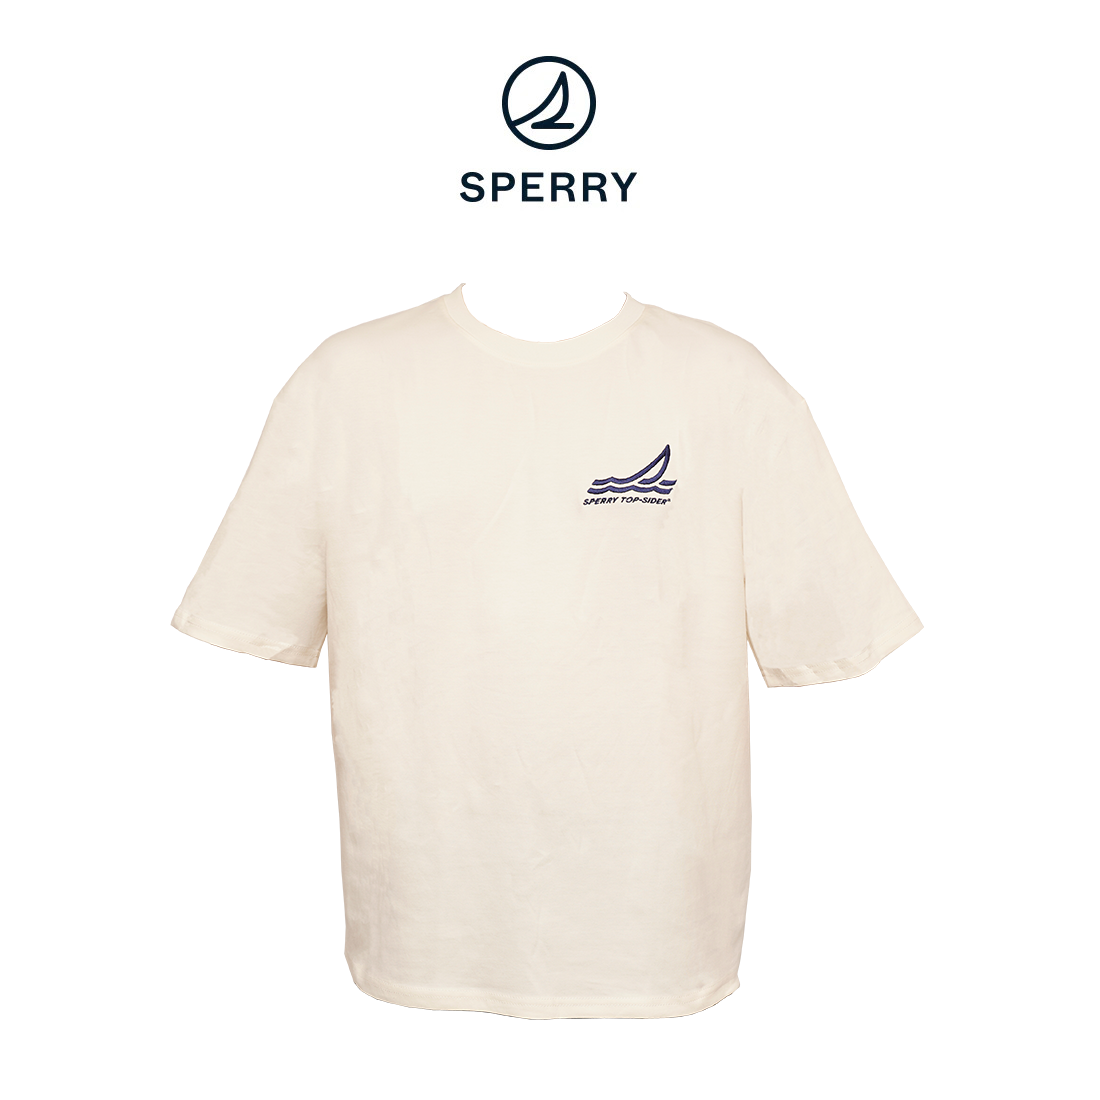 Sperry Limited Edition Top-Sider Oversized Tee